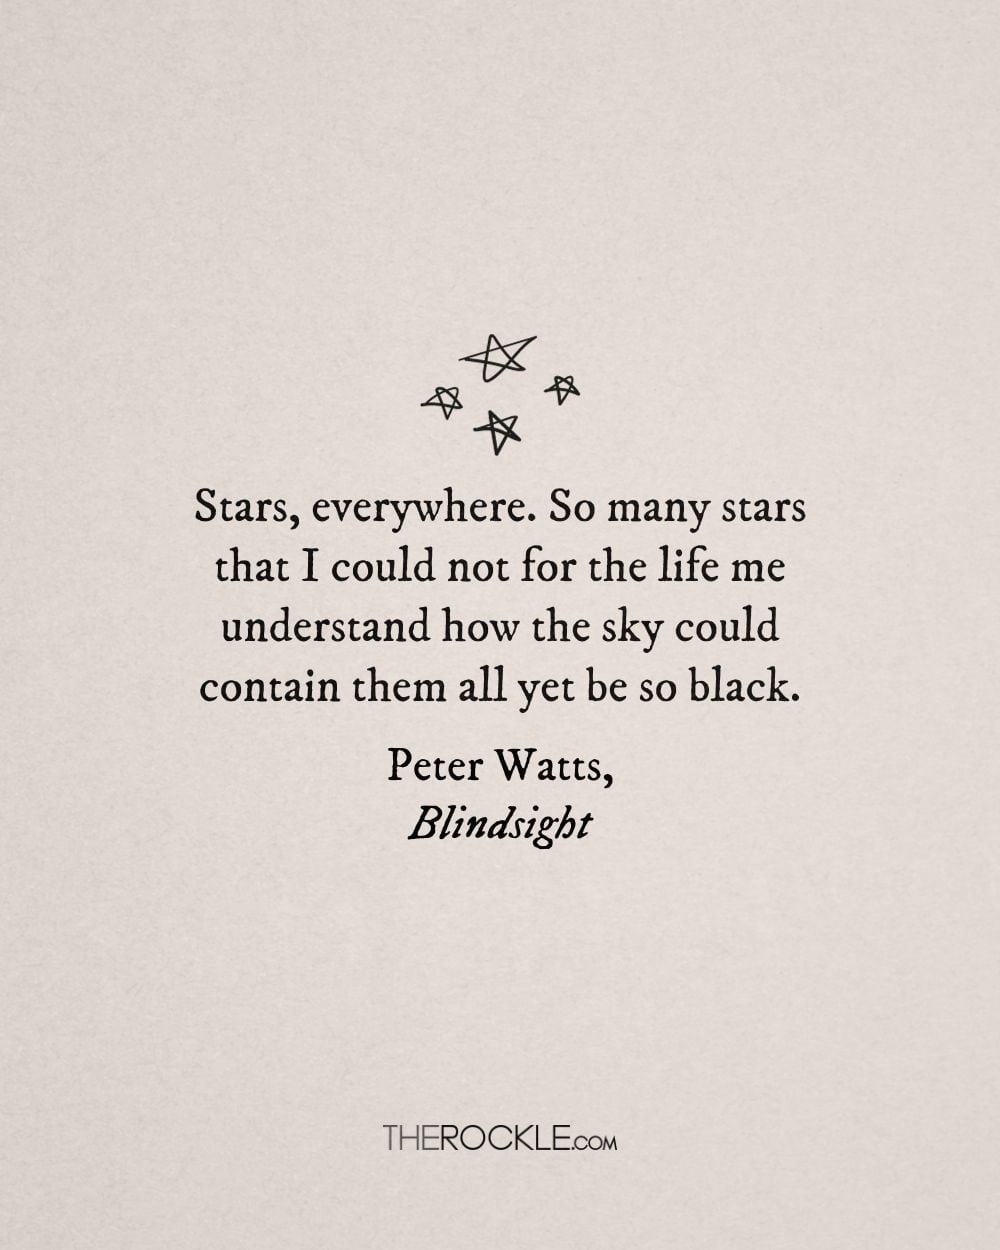 Peter Watts book quote